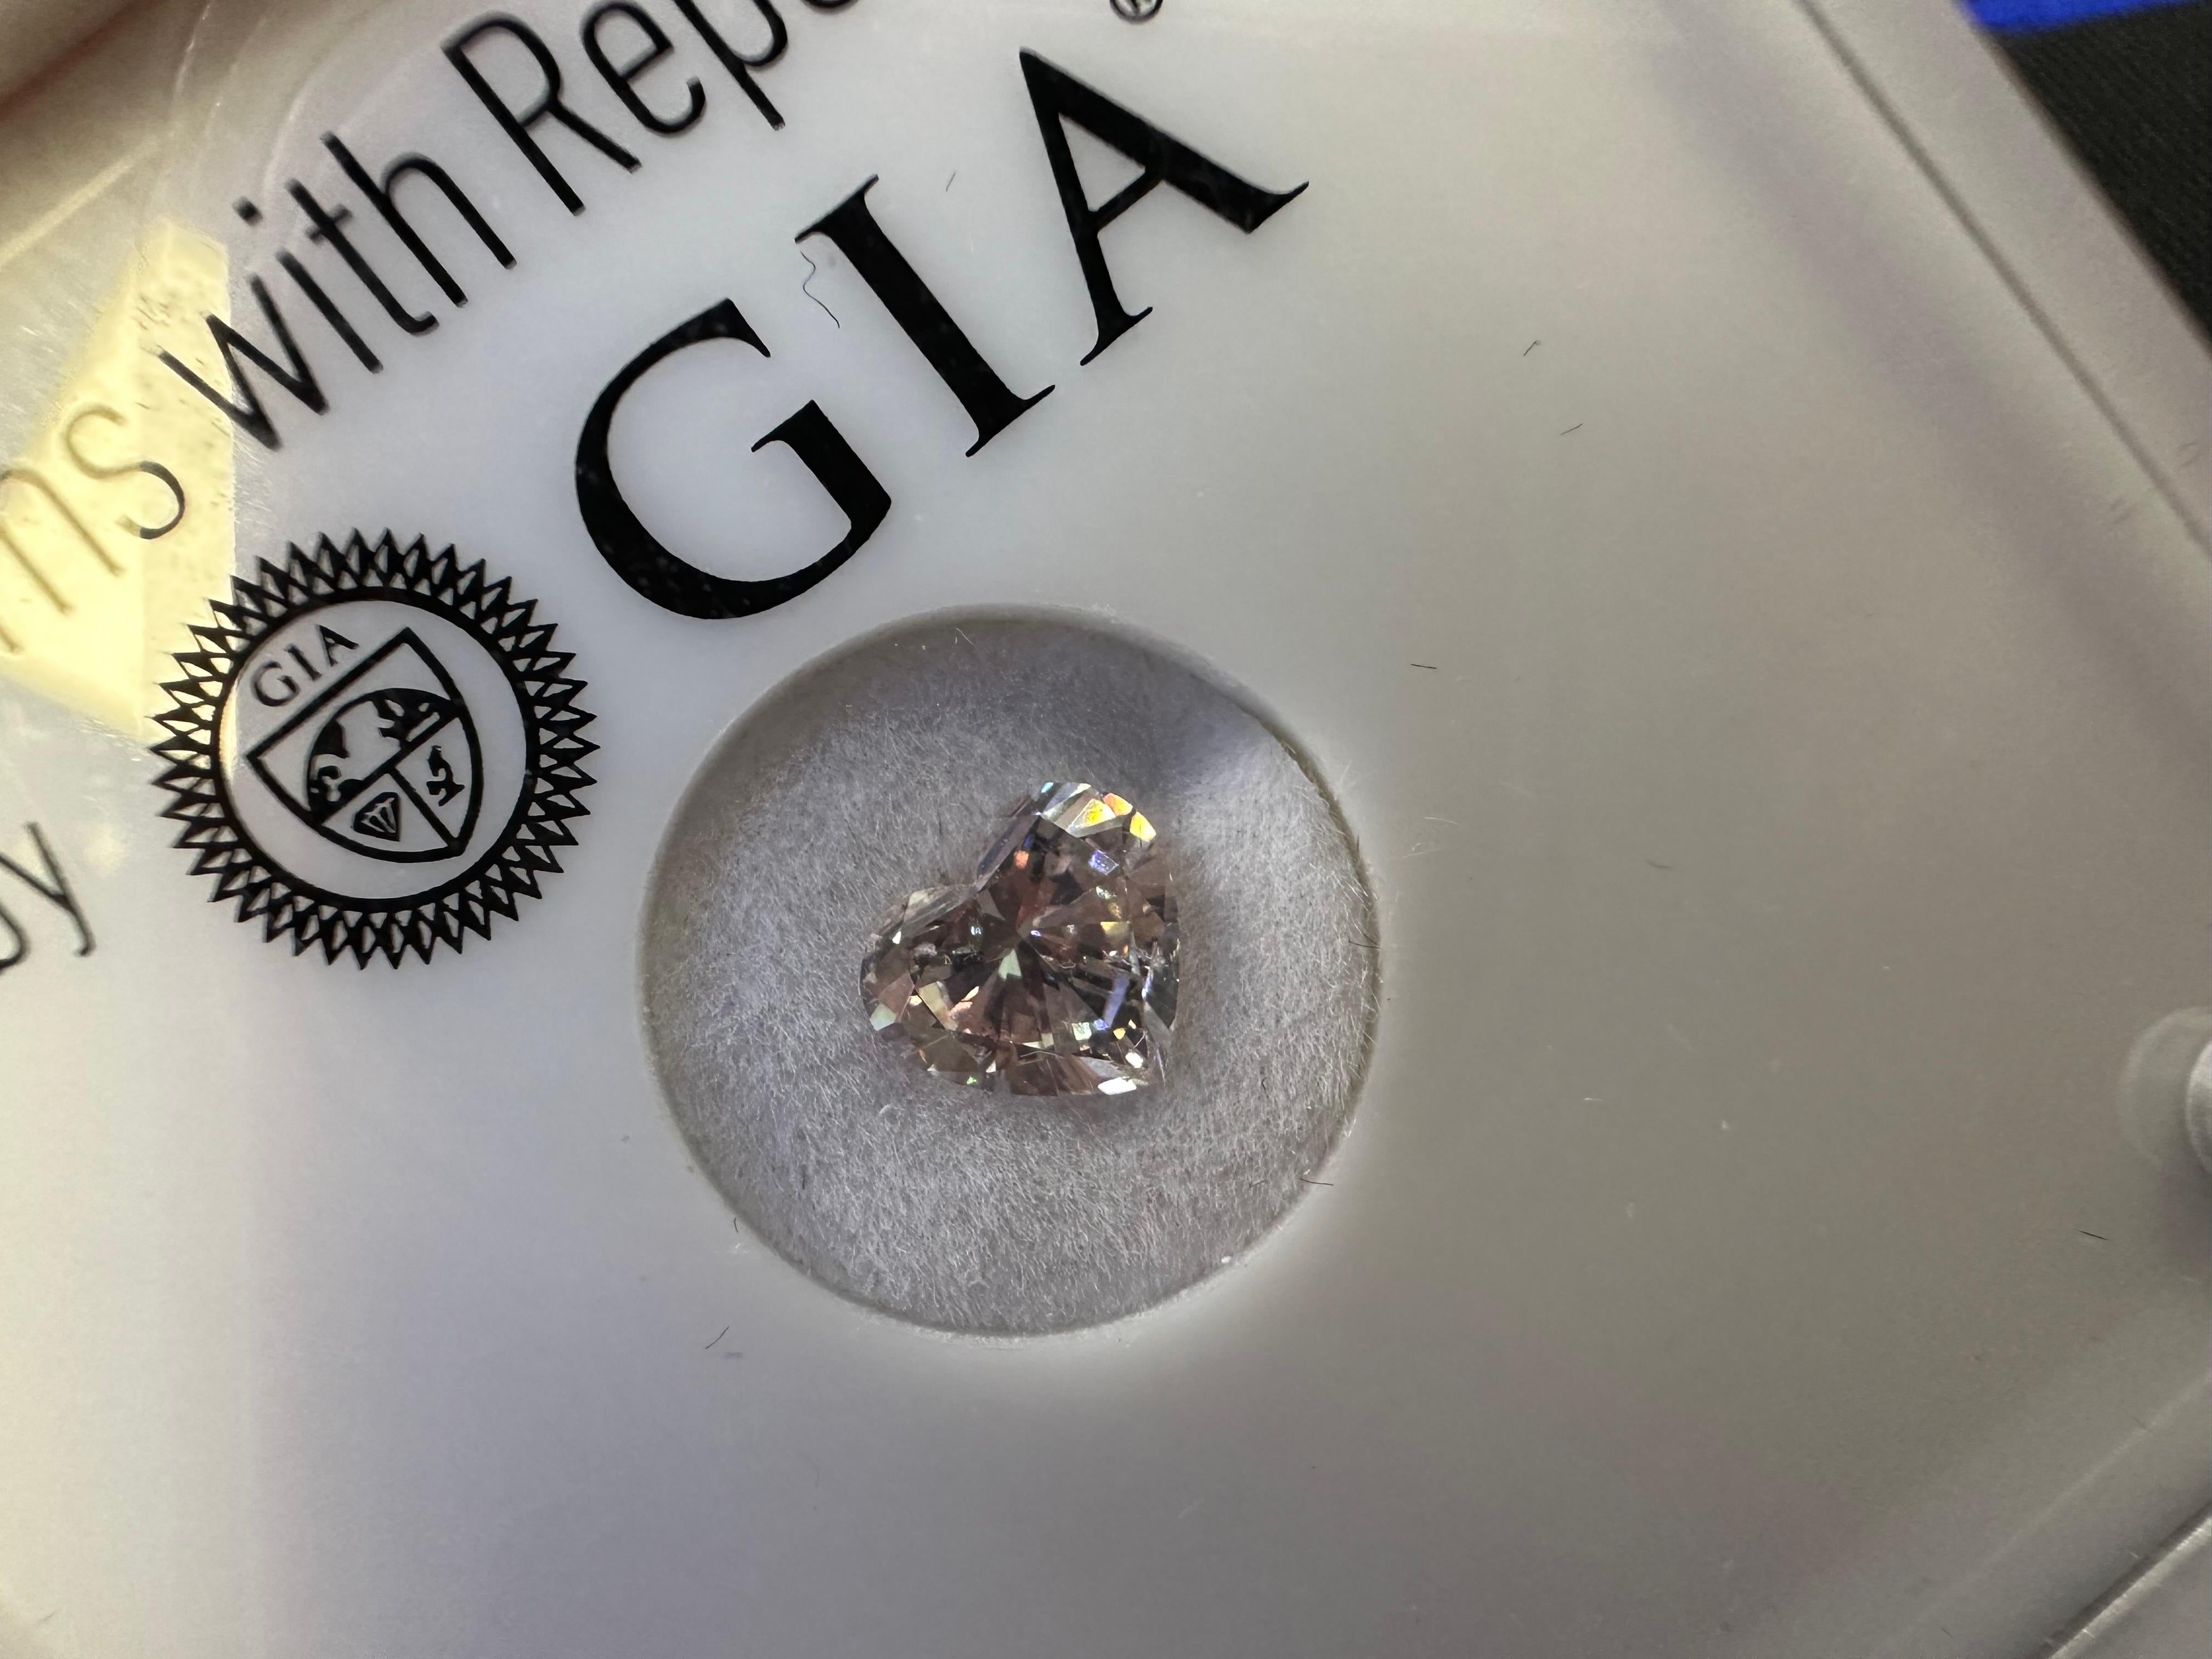 
Natural Color Diamond:
Color: Fancy Light Pink
Cut: Heart Brilliant
Carat: 1.03ct
Clarity: I1

Certificate of authenticity comes with purchase

ABOUT US
We are a family-owned business. Our studio in located in the heart of Boca Raton at the